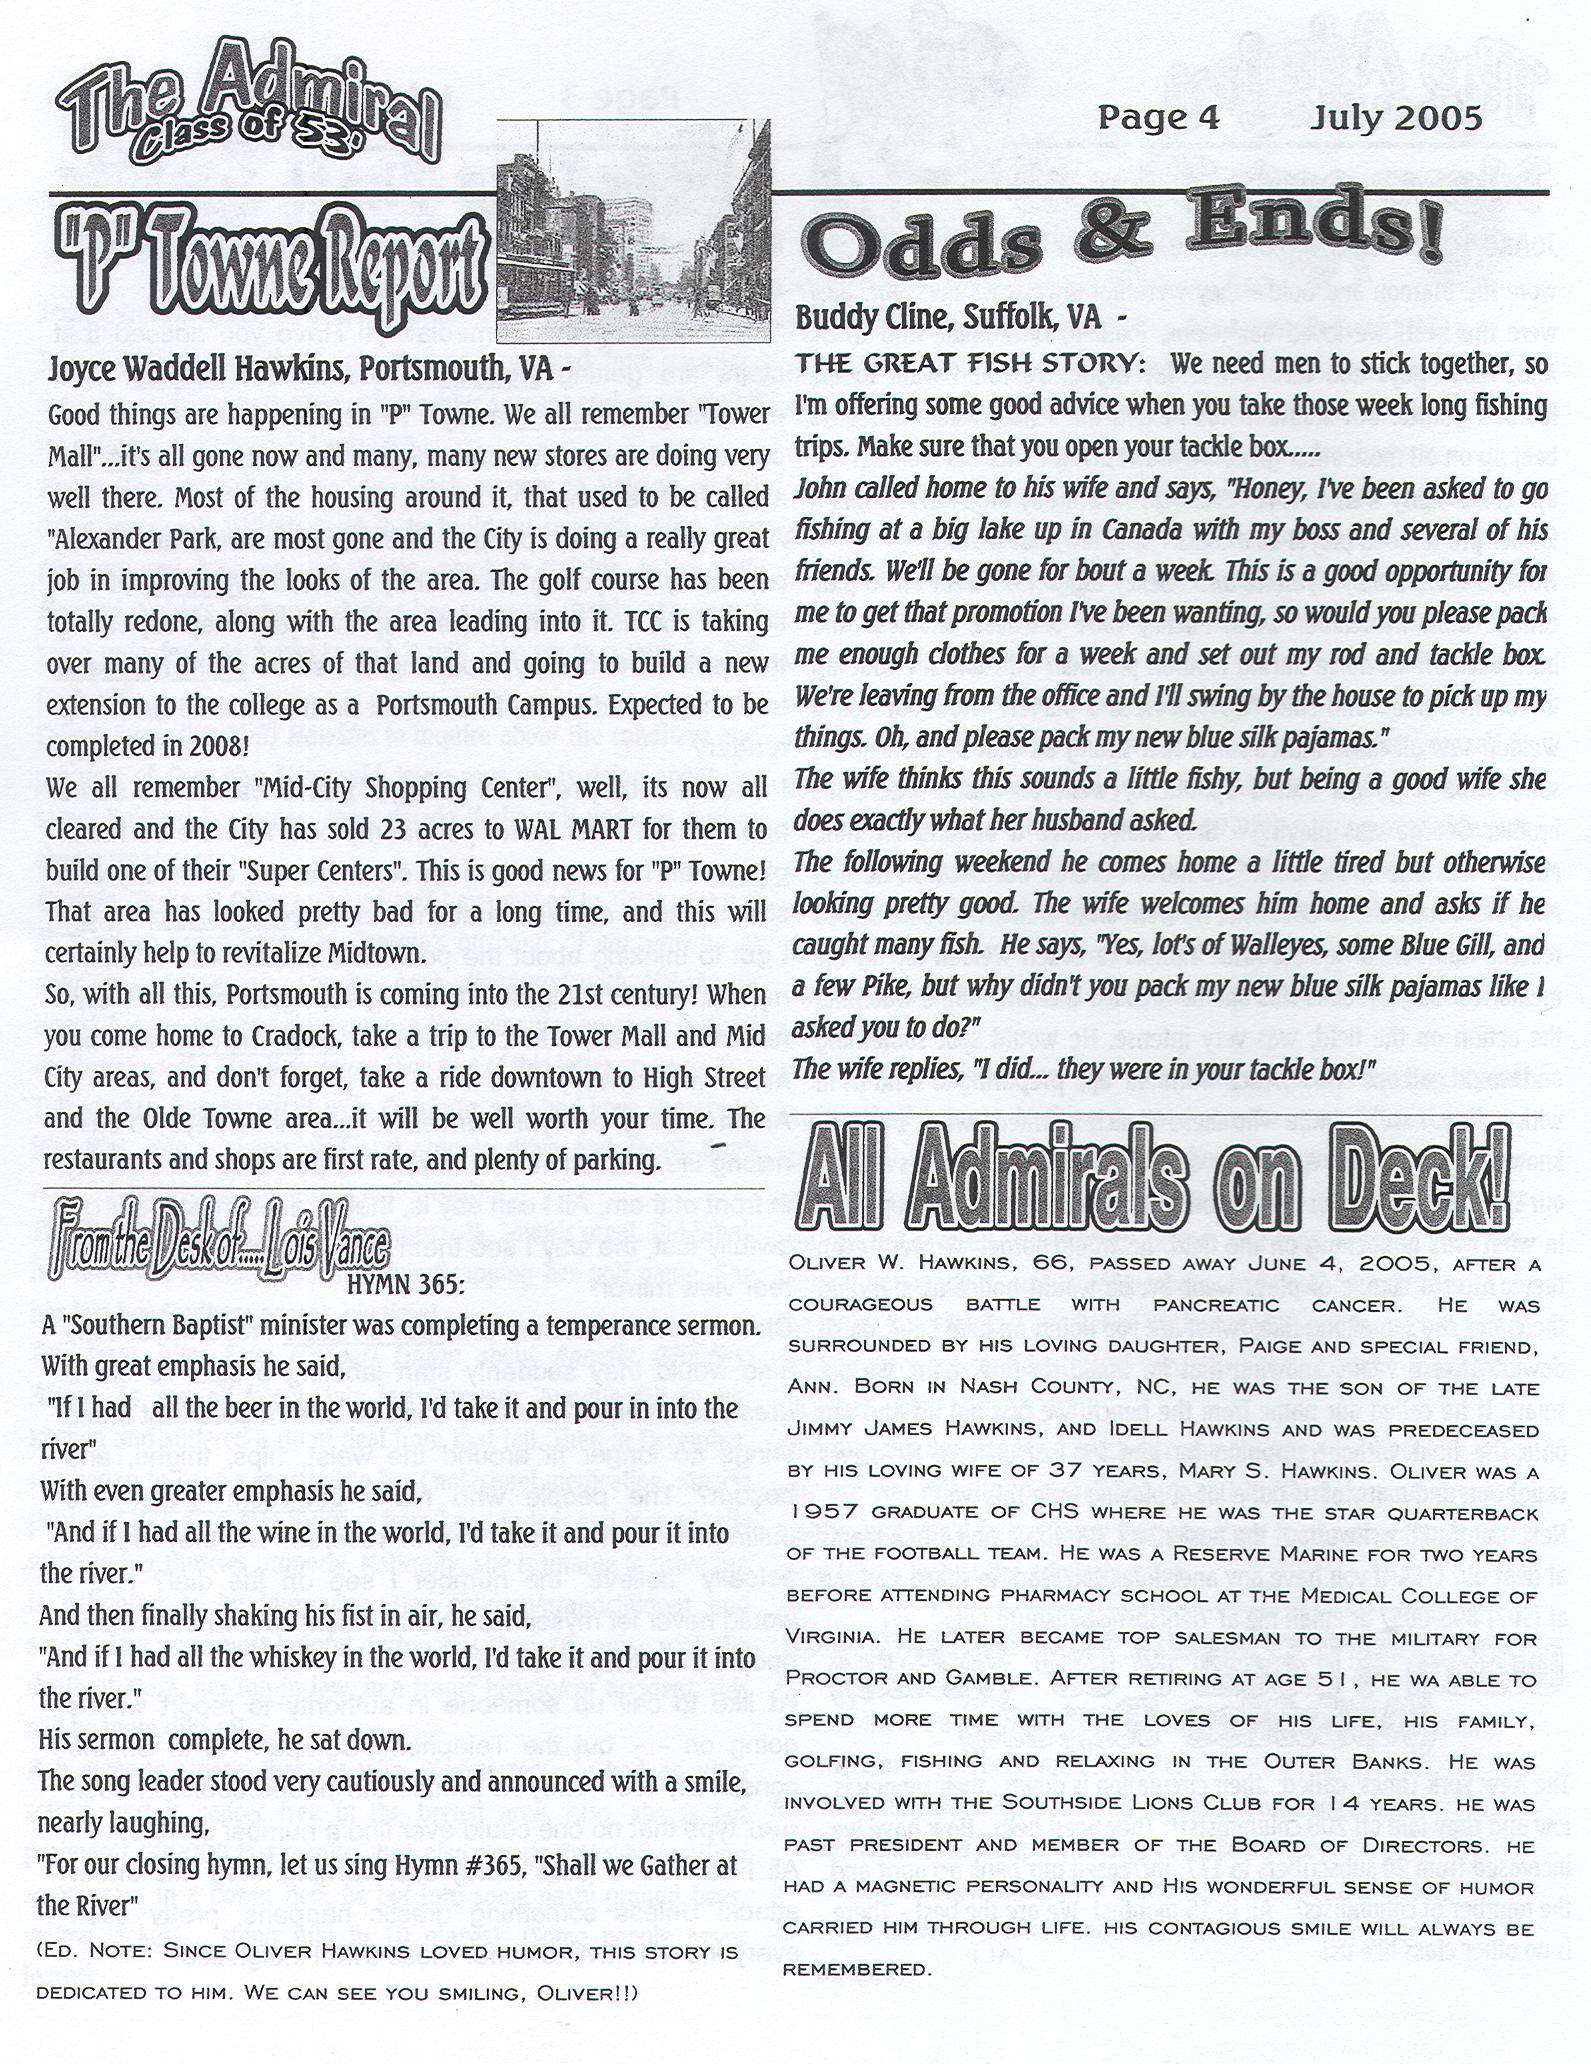 The Admiral - July 2005 - pg. 4